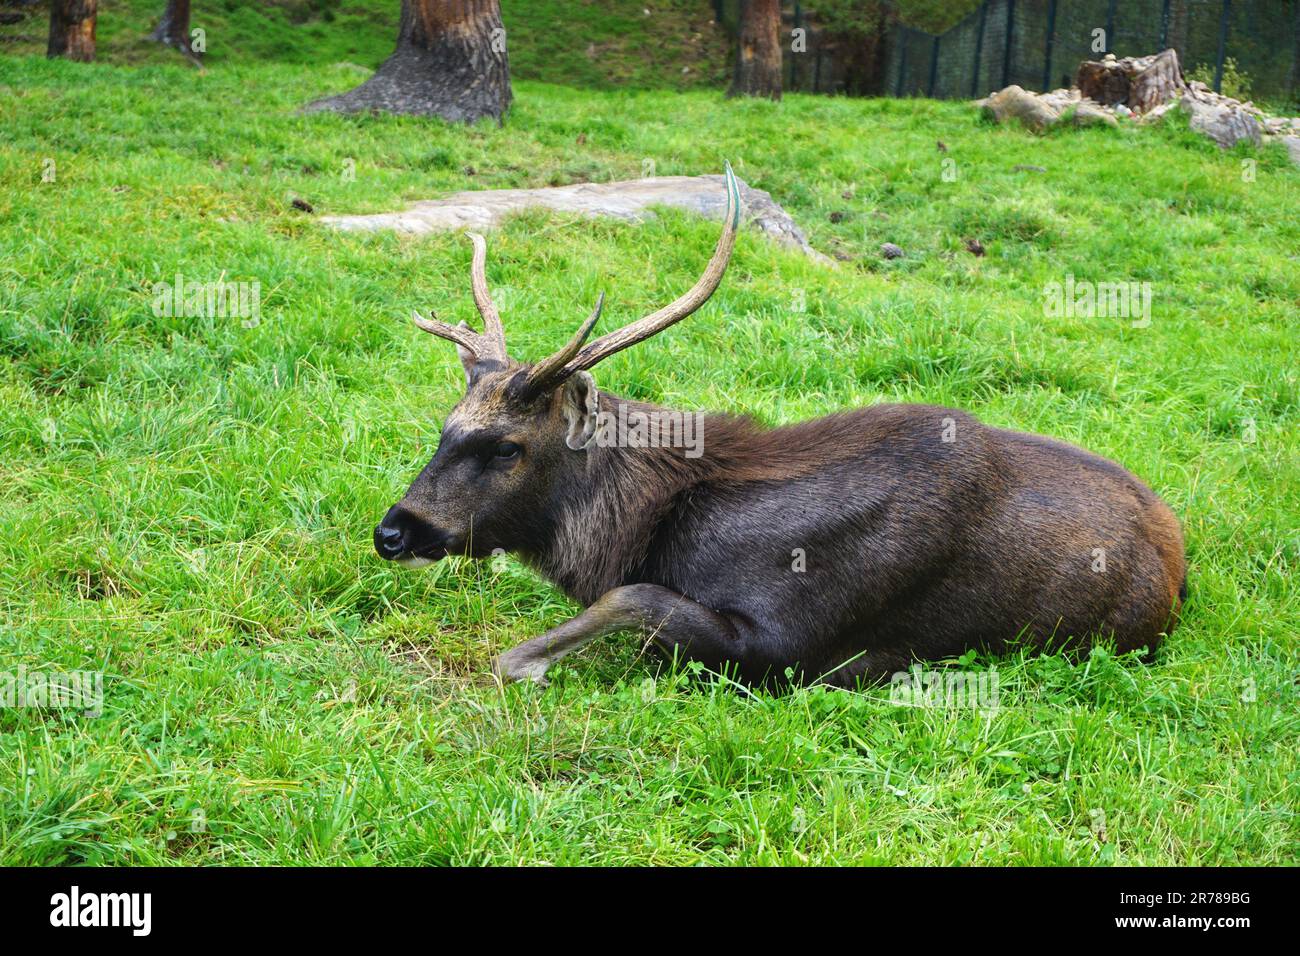 Mature Sambar deer rests in the grass at the Motithang Takin Preserve in Thimphu, Bhutan. They are listed as a vulnerable species on the IUCN Red List Stock Photo